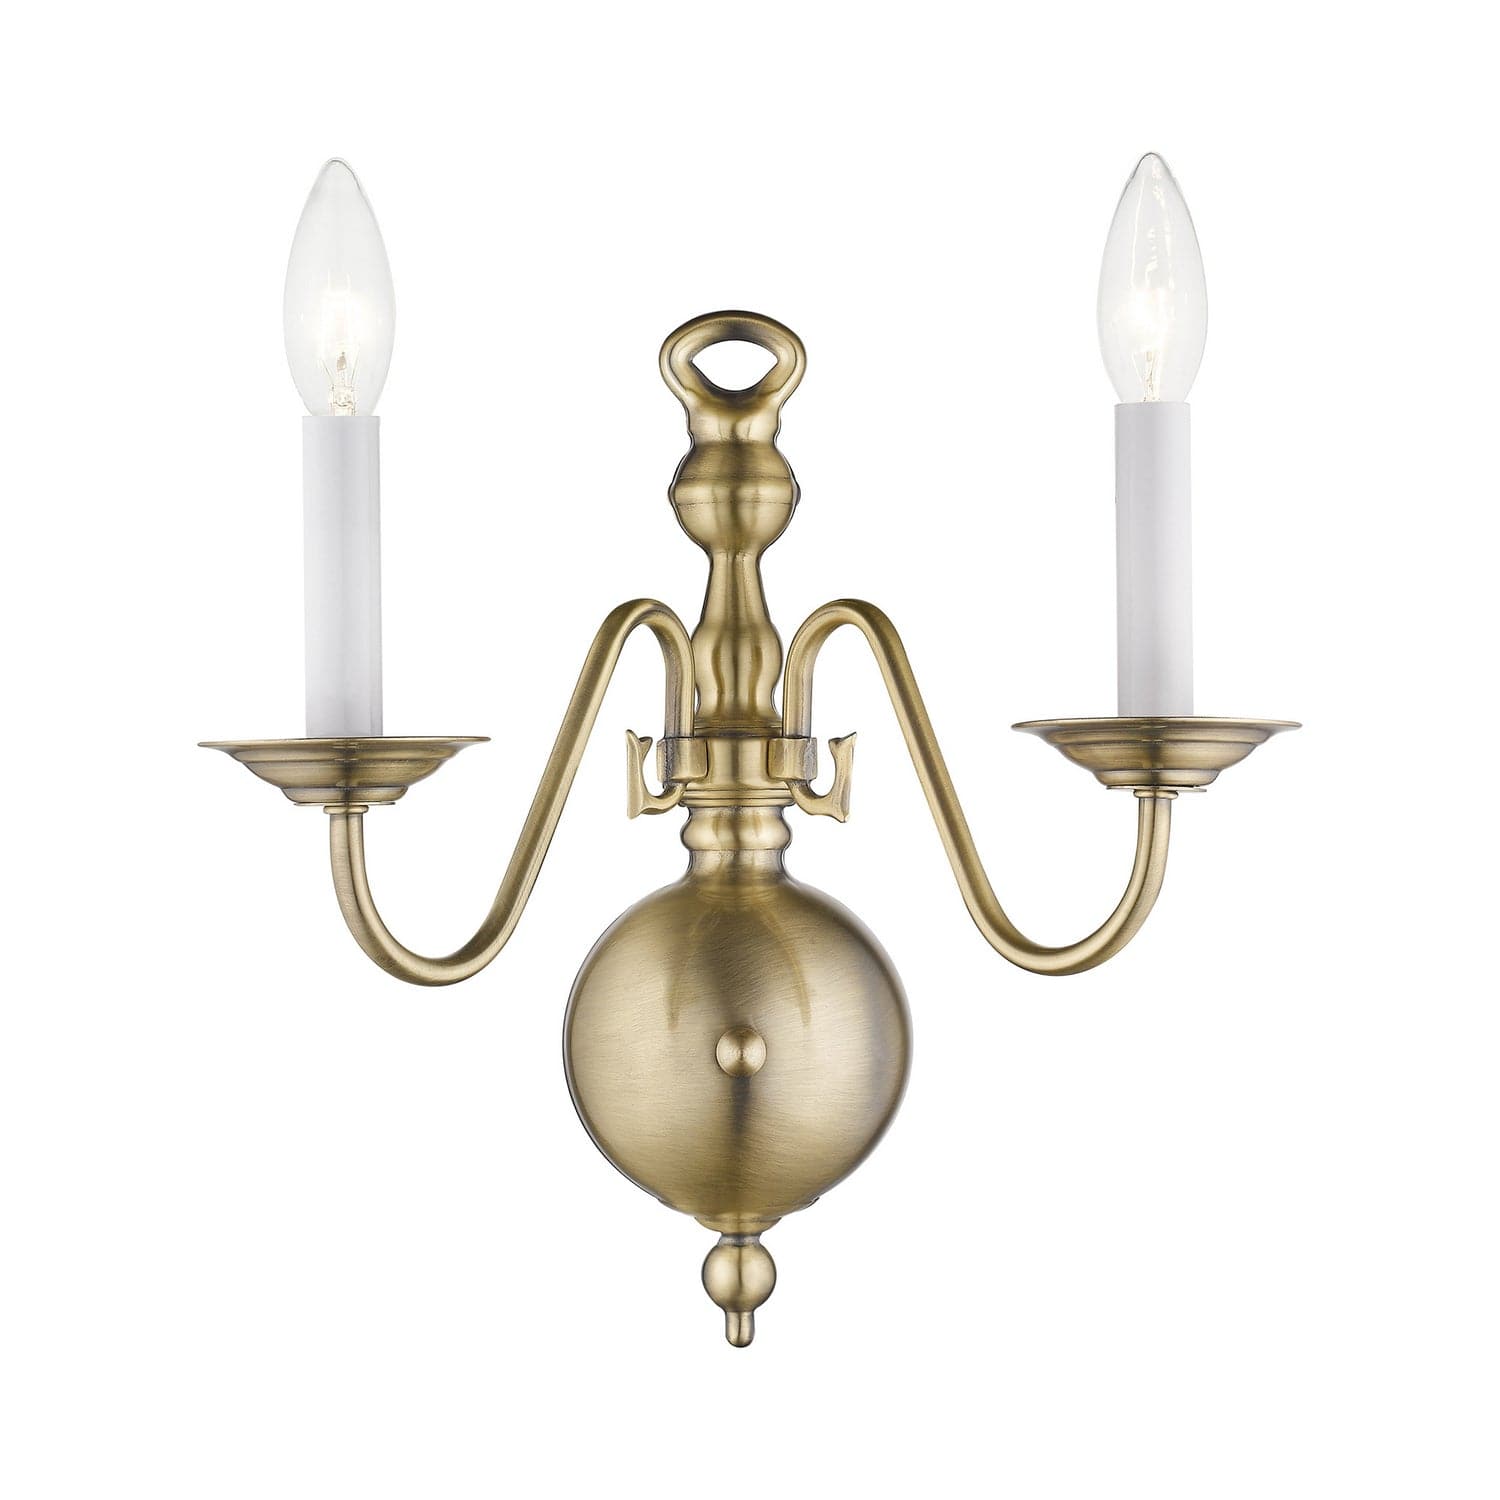 Livex Lighting - 5002-01 - Two Light Wall Sconce - Williamsburgh - Antique Brass